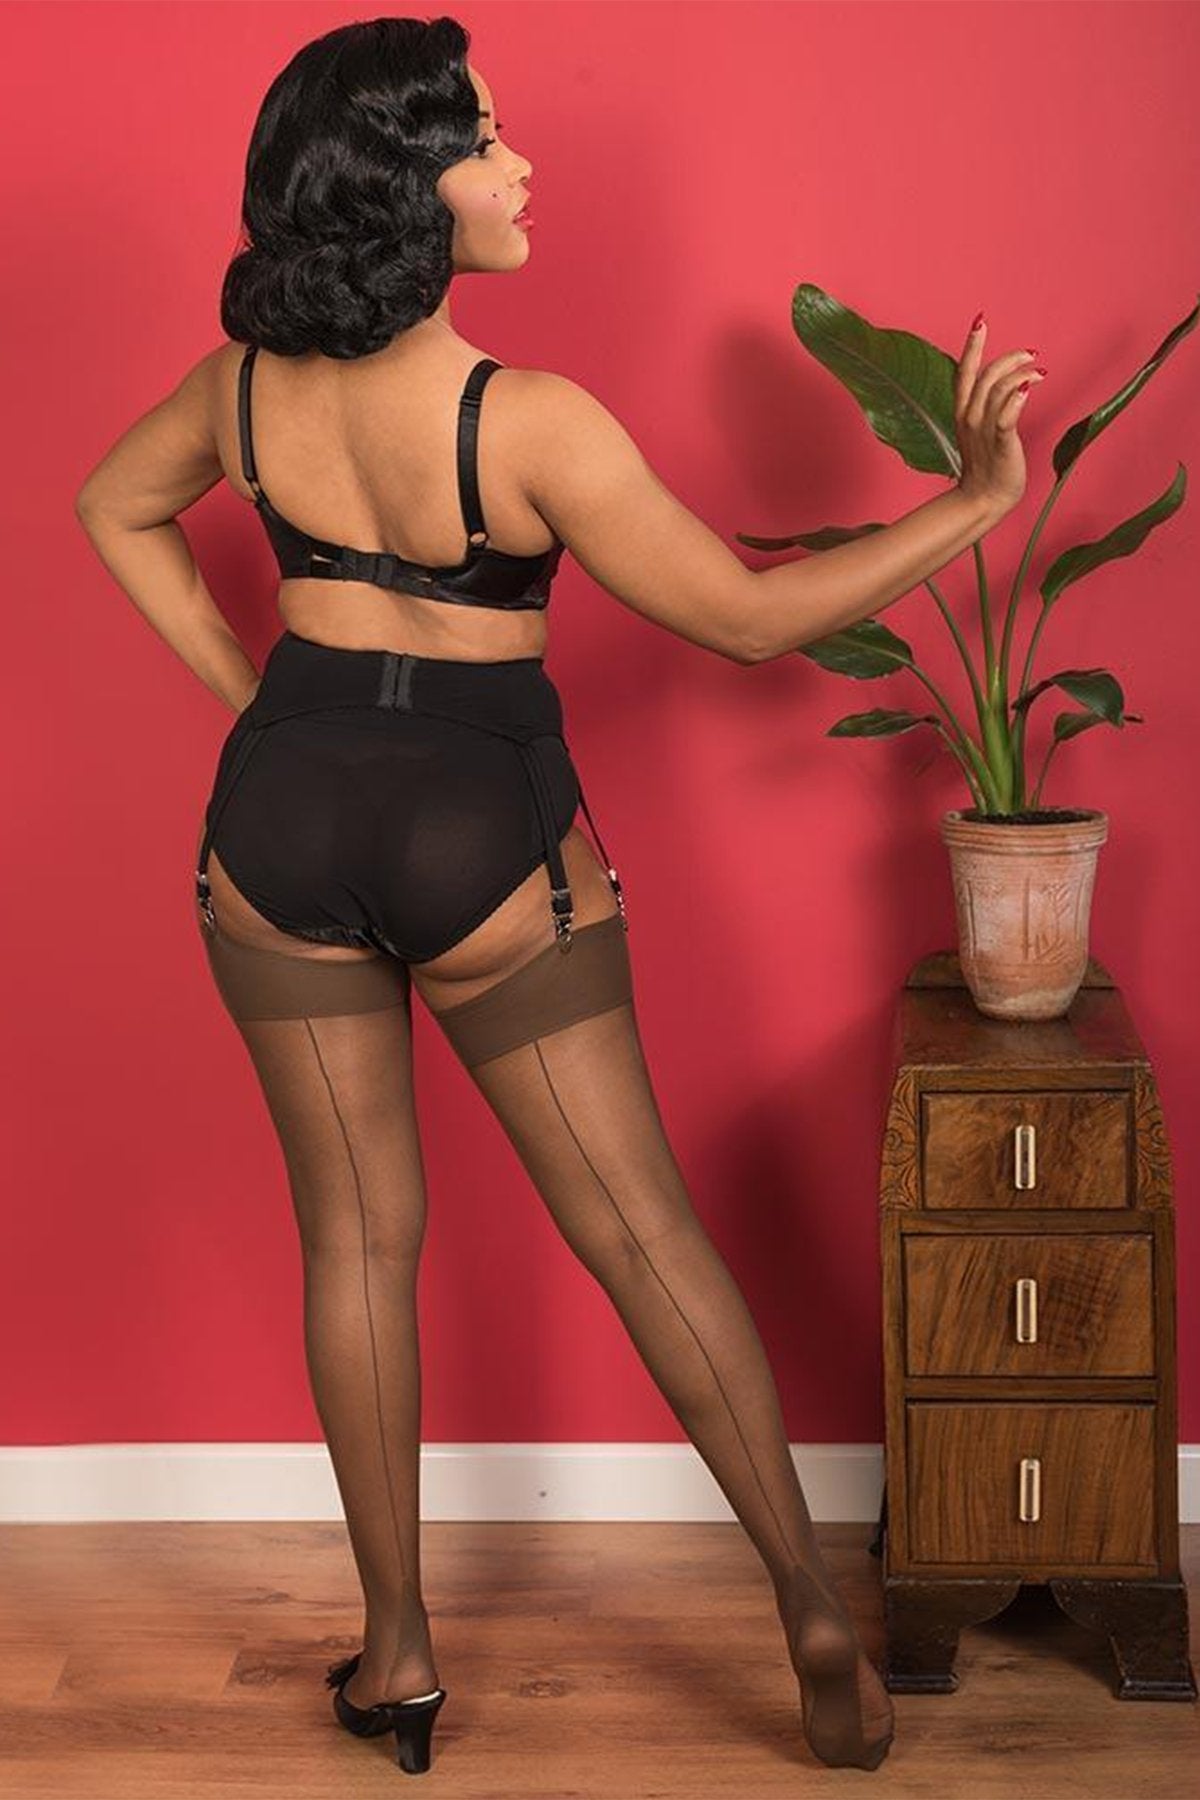 What Katie Did UK Contrast seamed stockings in brown and coffee back seam. Works well for a variety of skin tones. Perfect to pull together an authentic vintage pin up style look. Wear with a garter belt as there is no silicone band. - The Proper Pinup